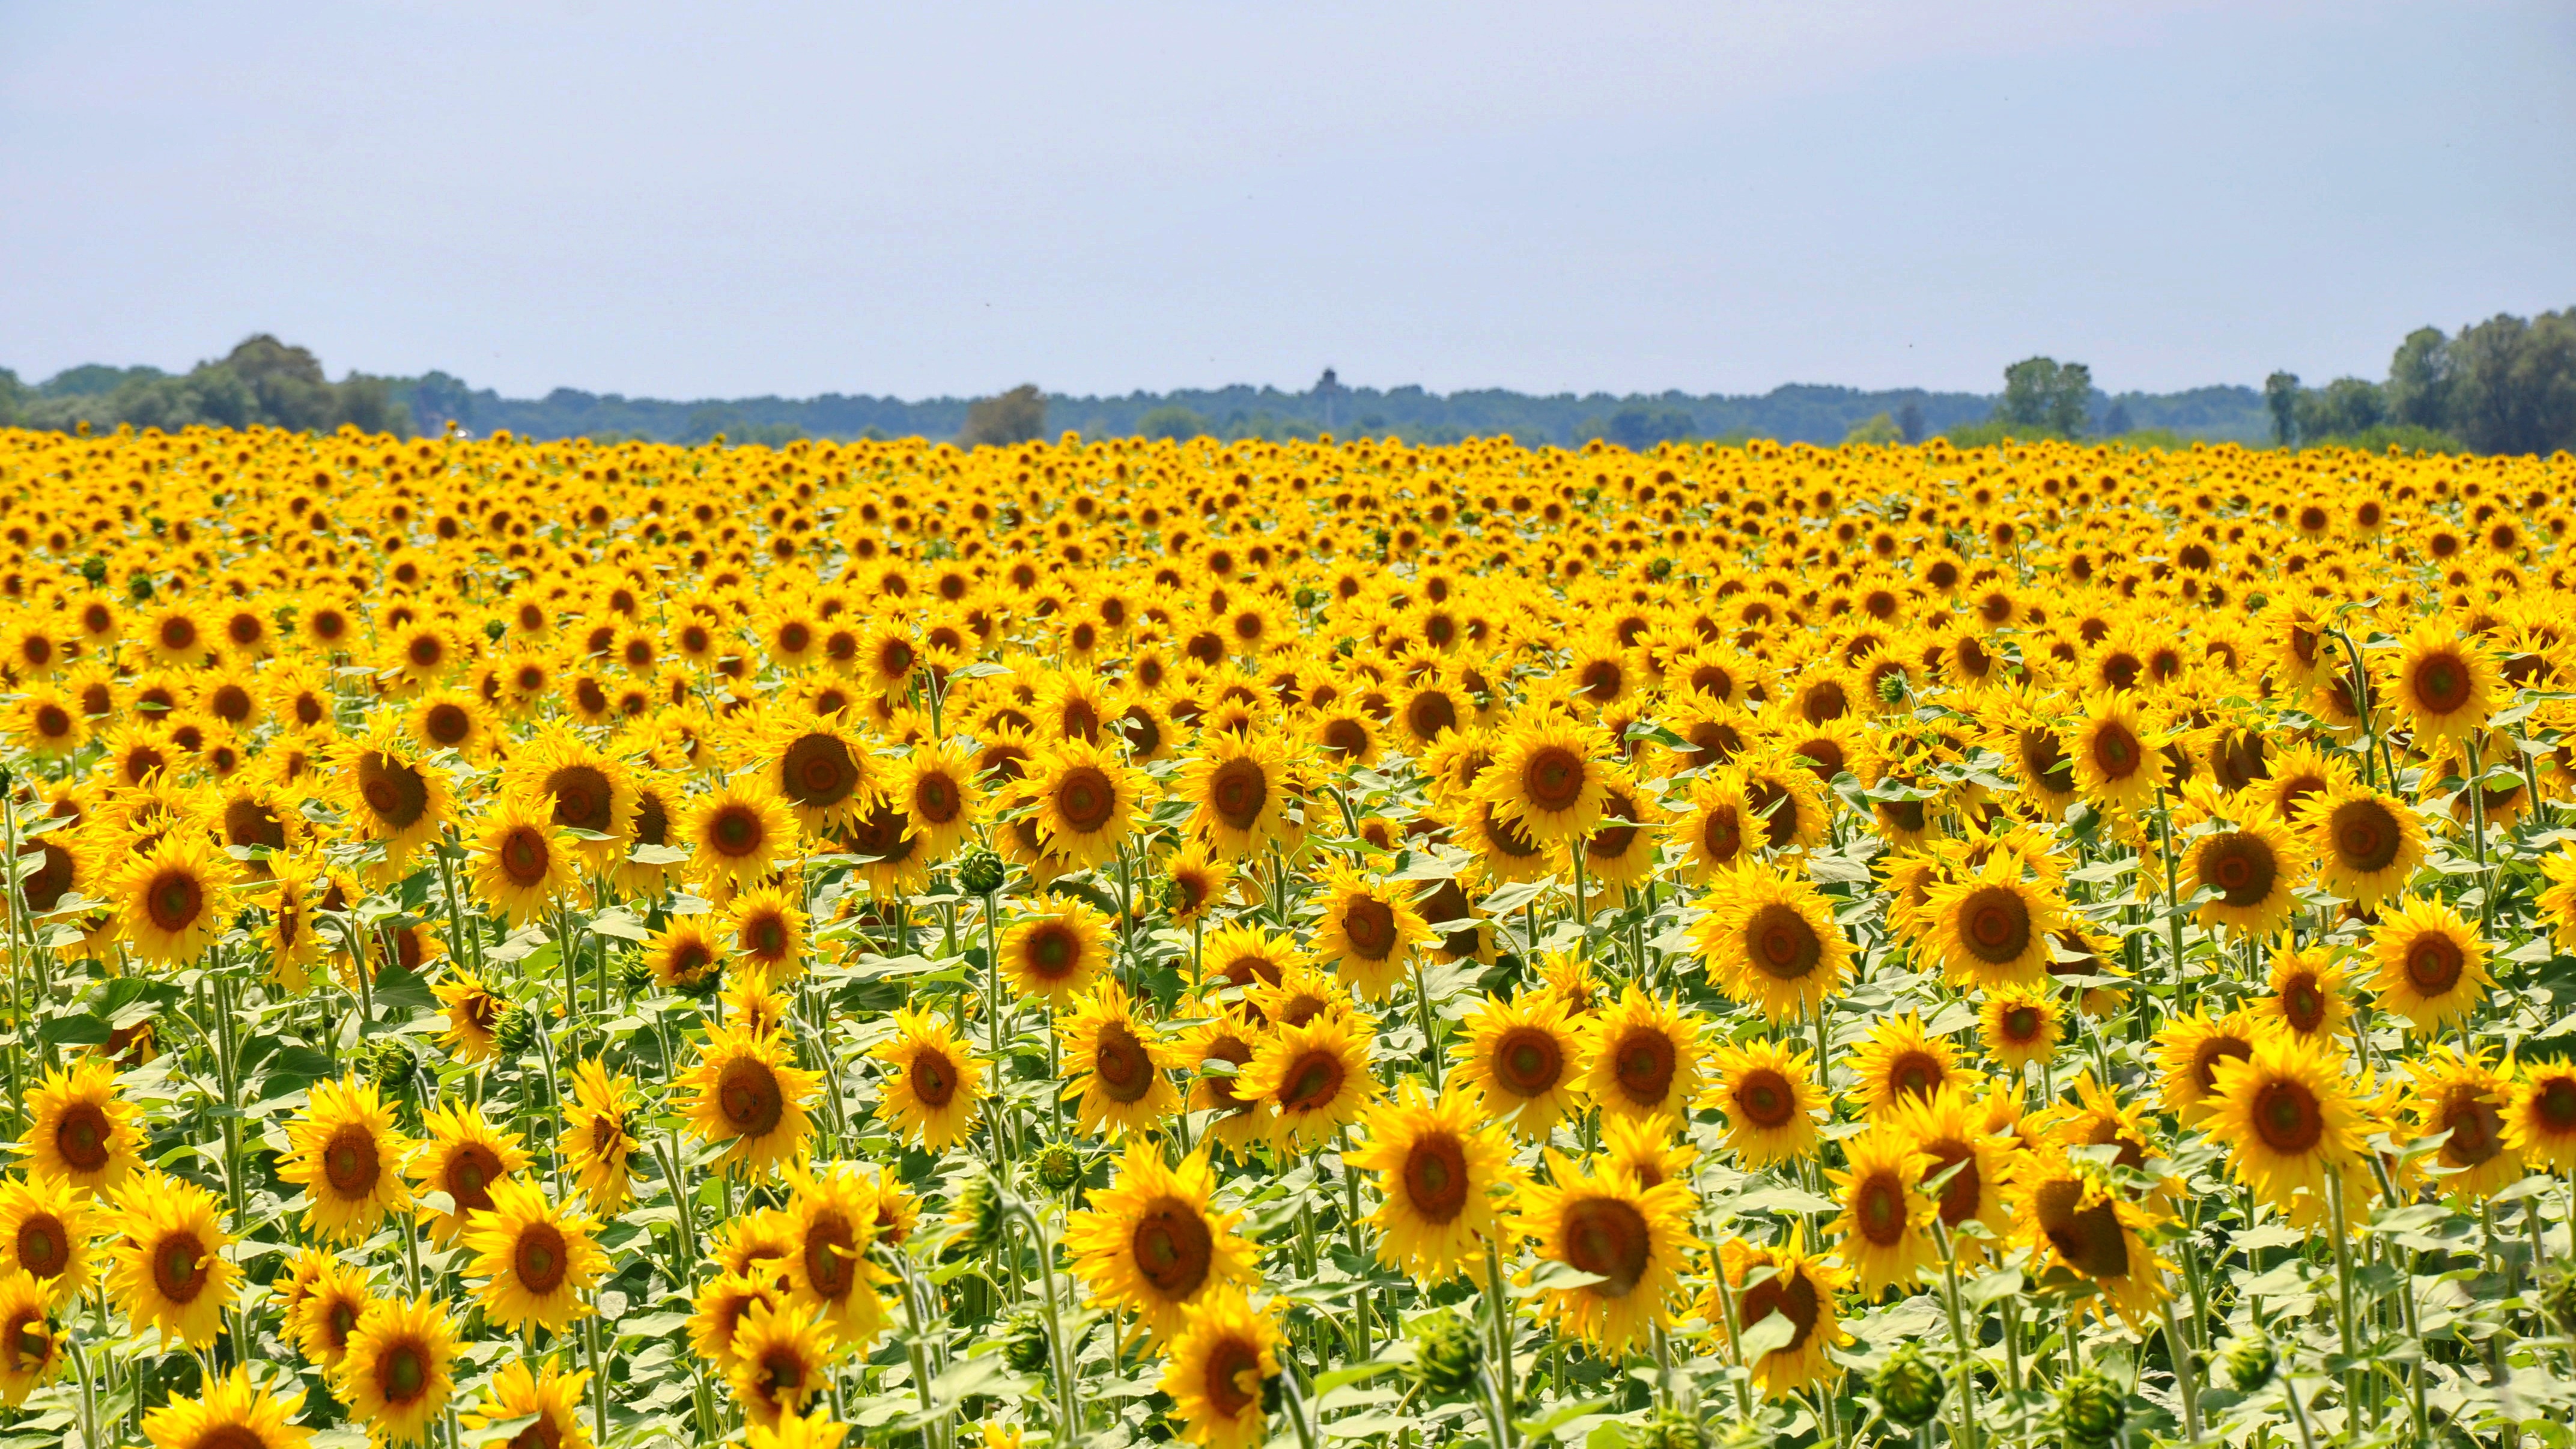 A field of sunflowers goes into the horizon